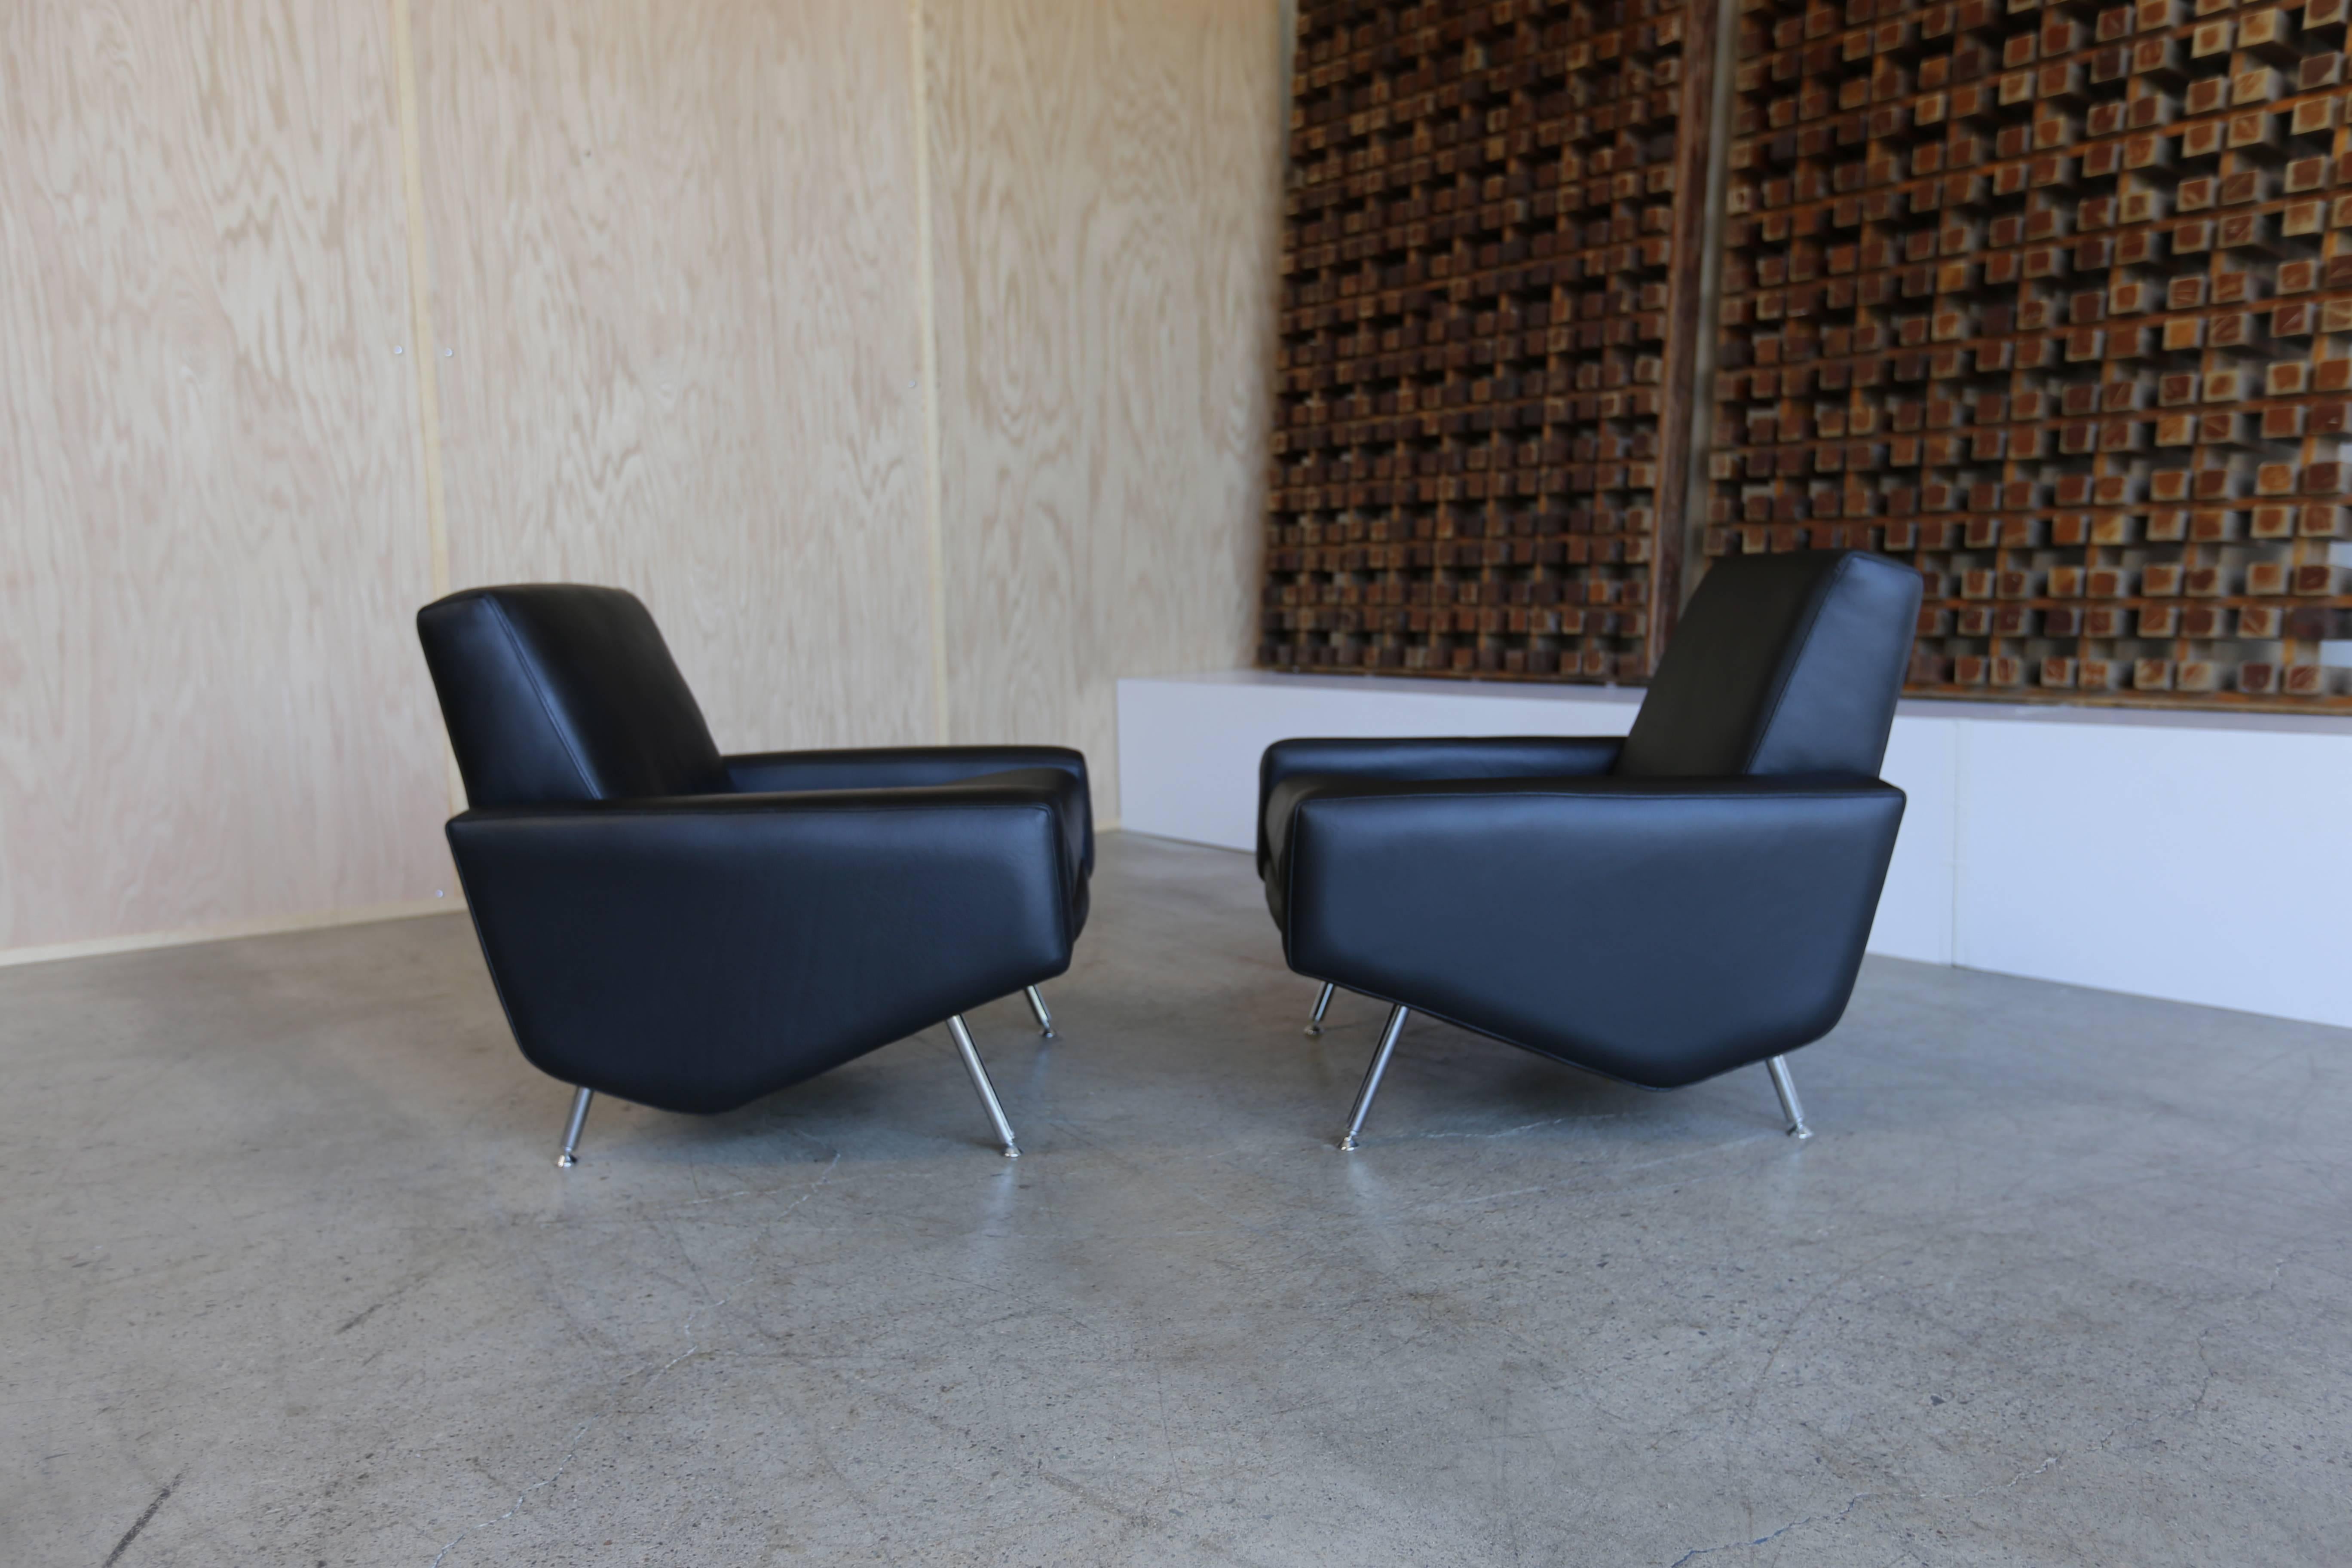 Pair of leather lounge chairs by Airborne France.